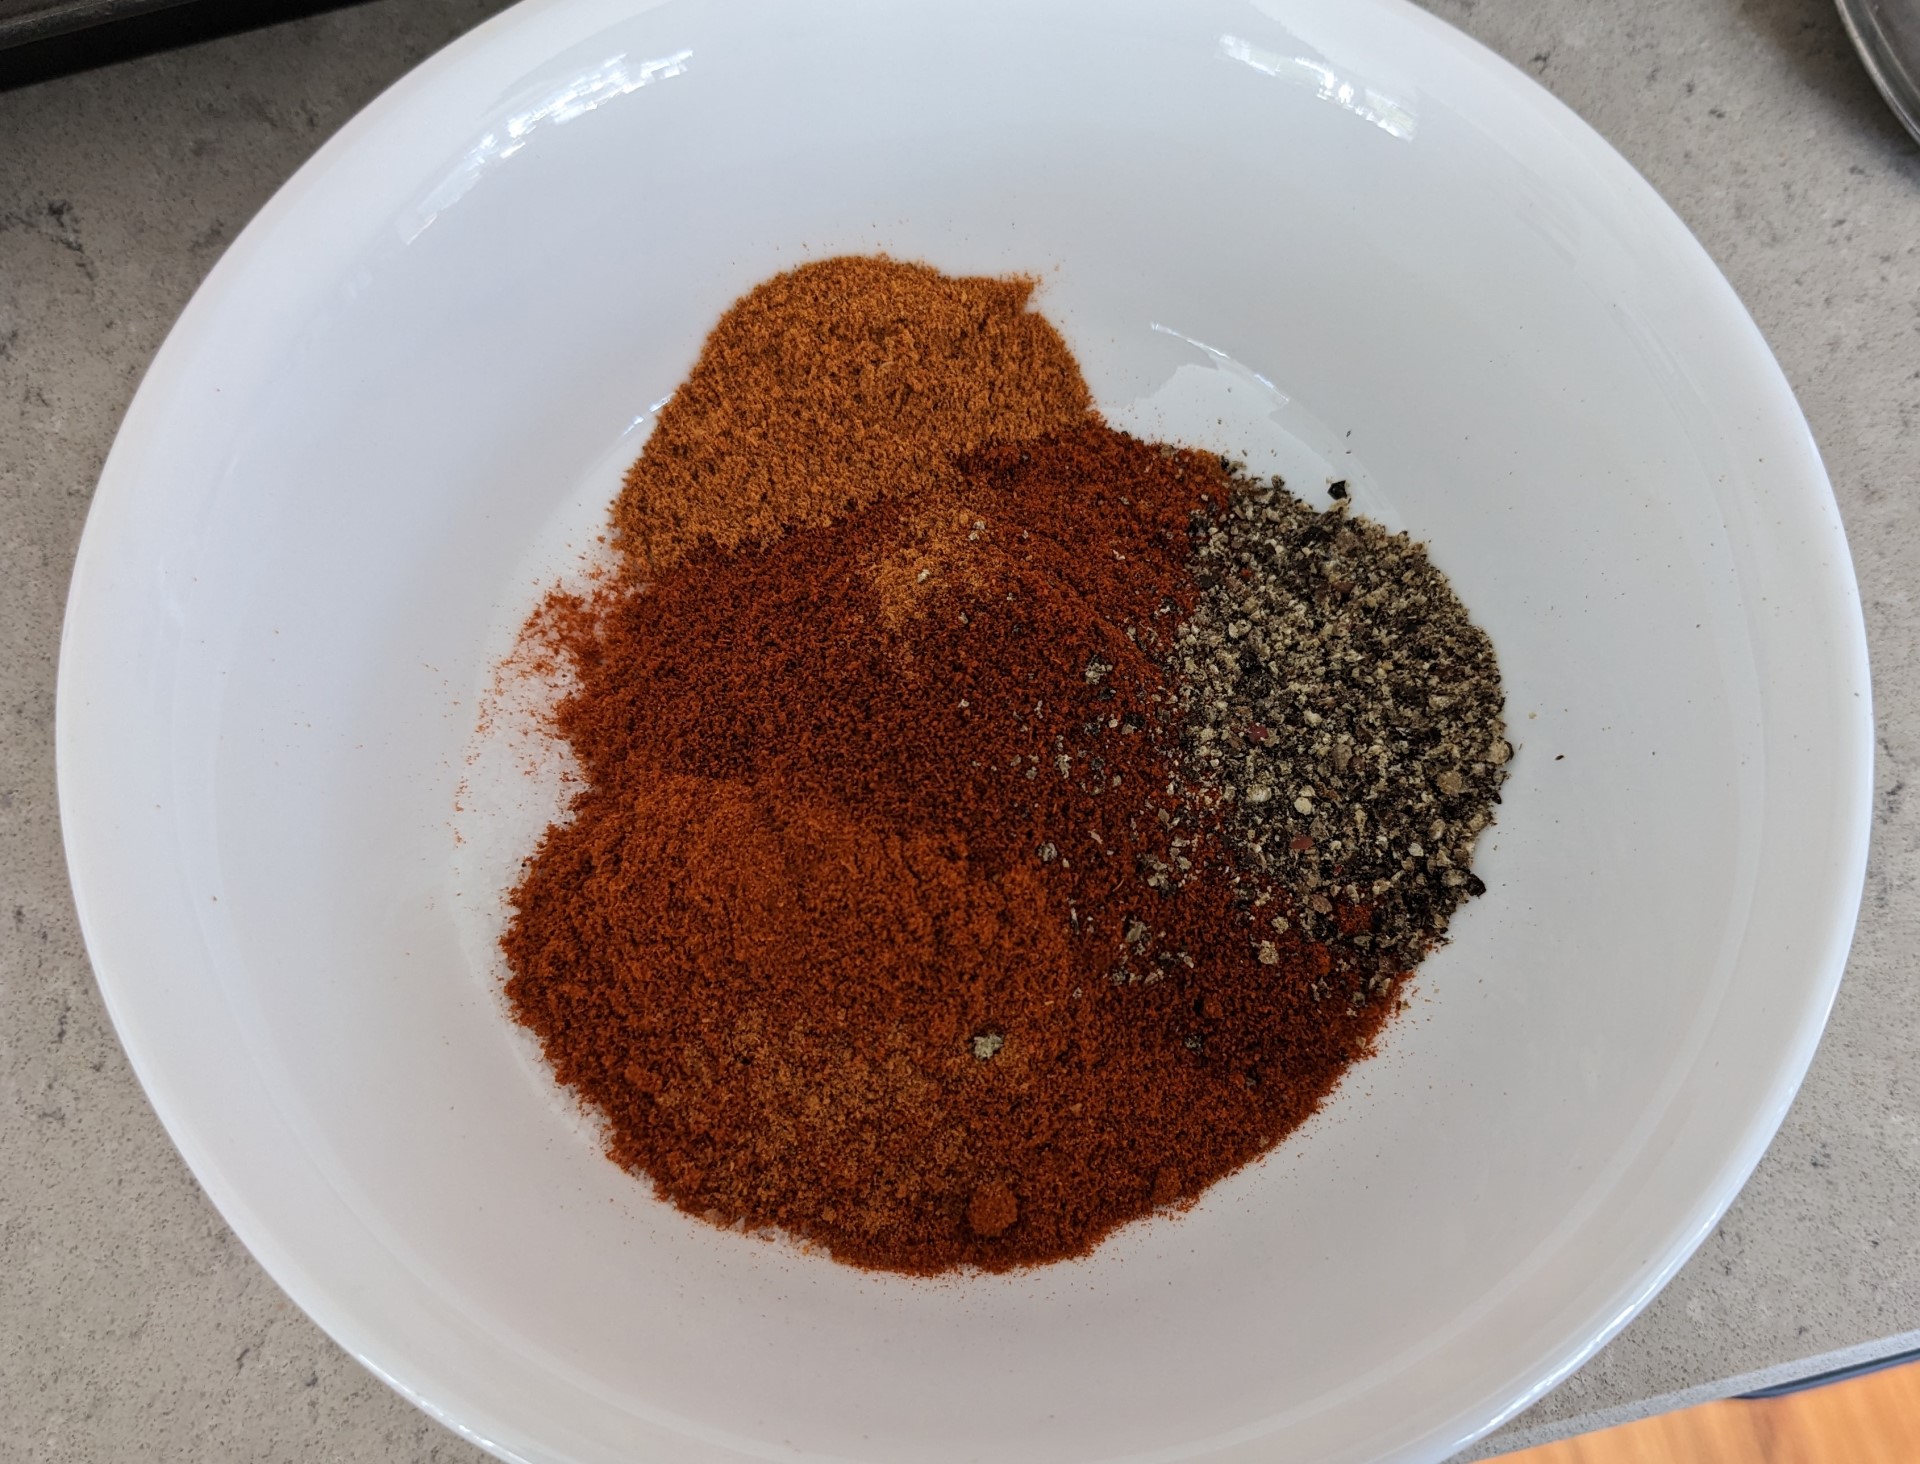 The spice mix